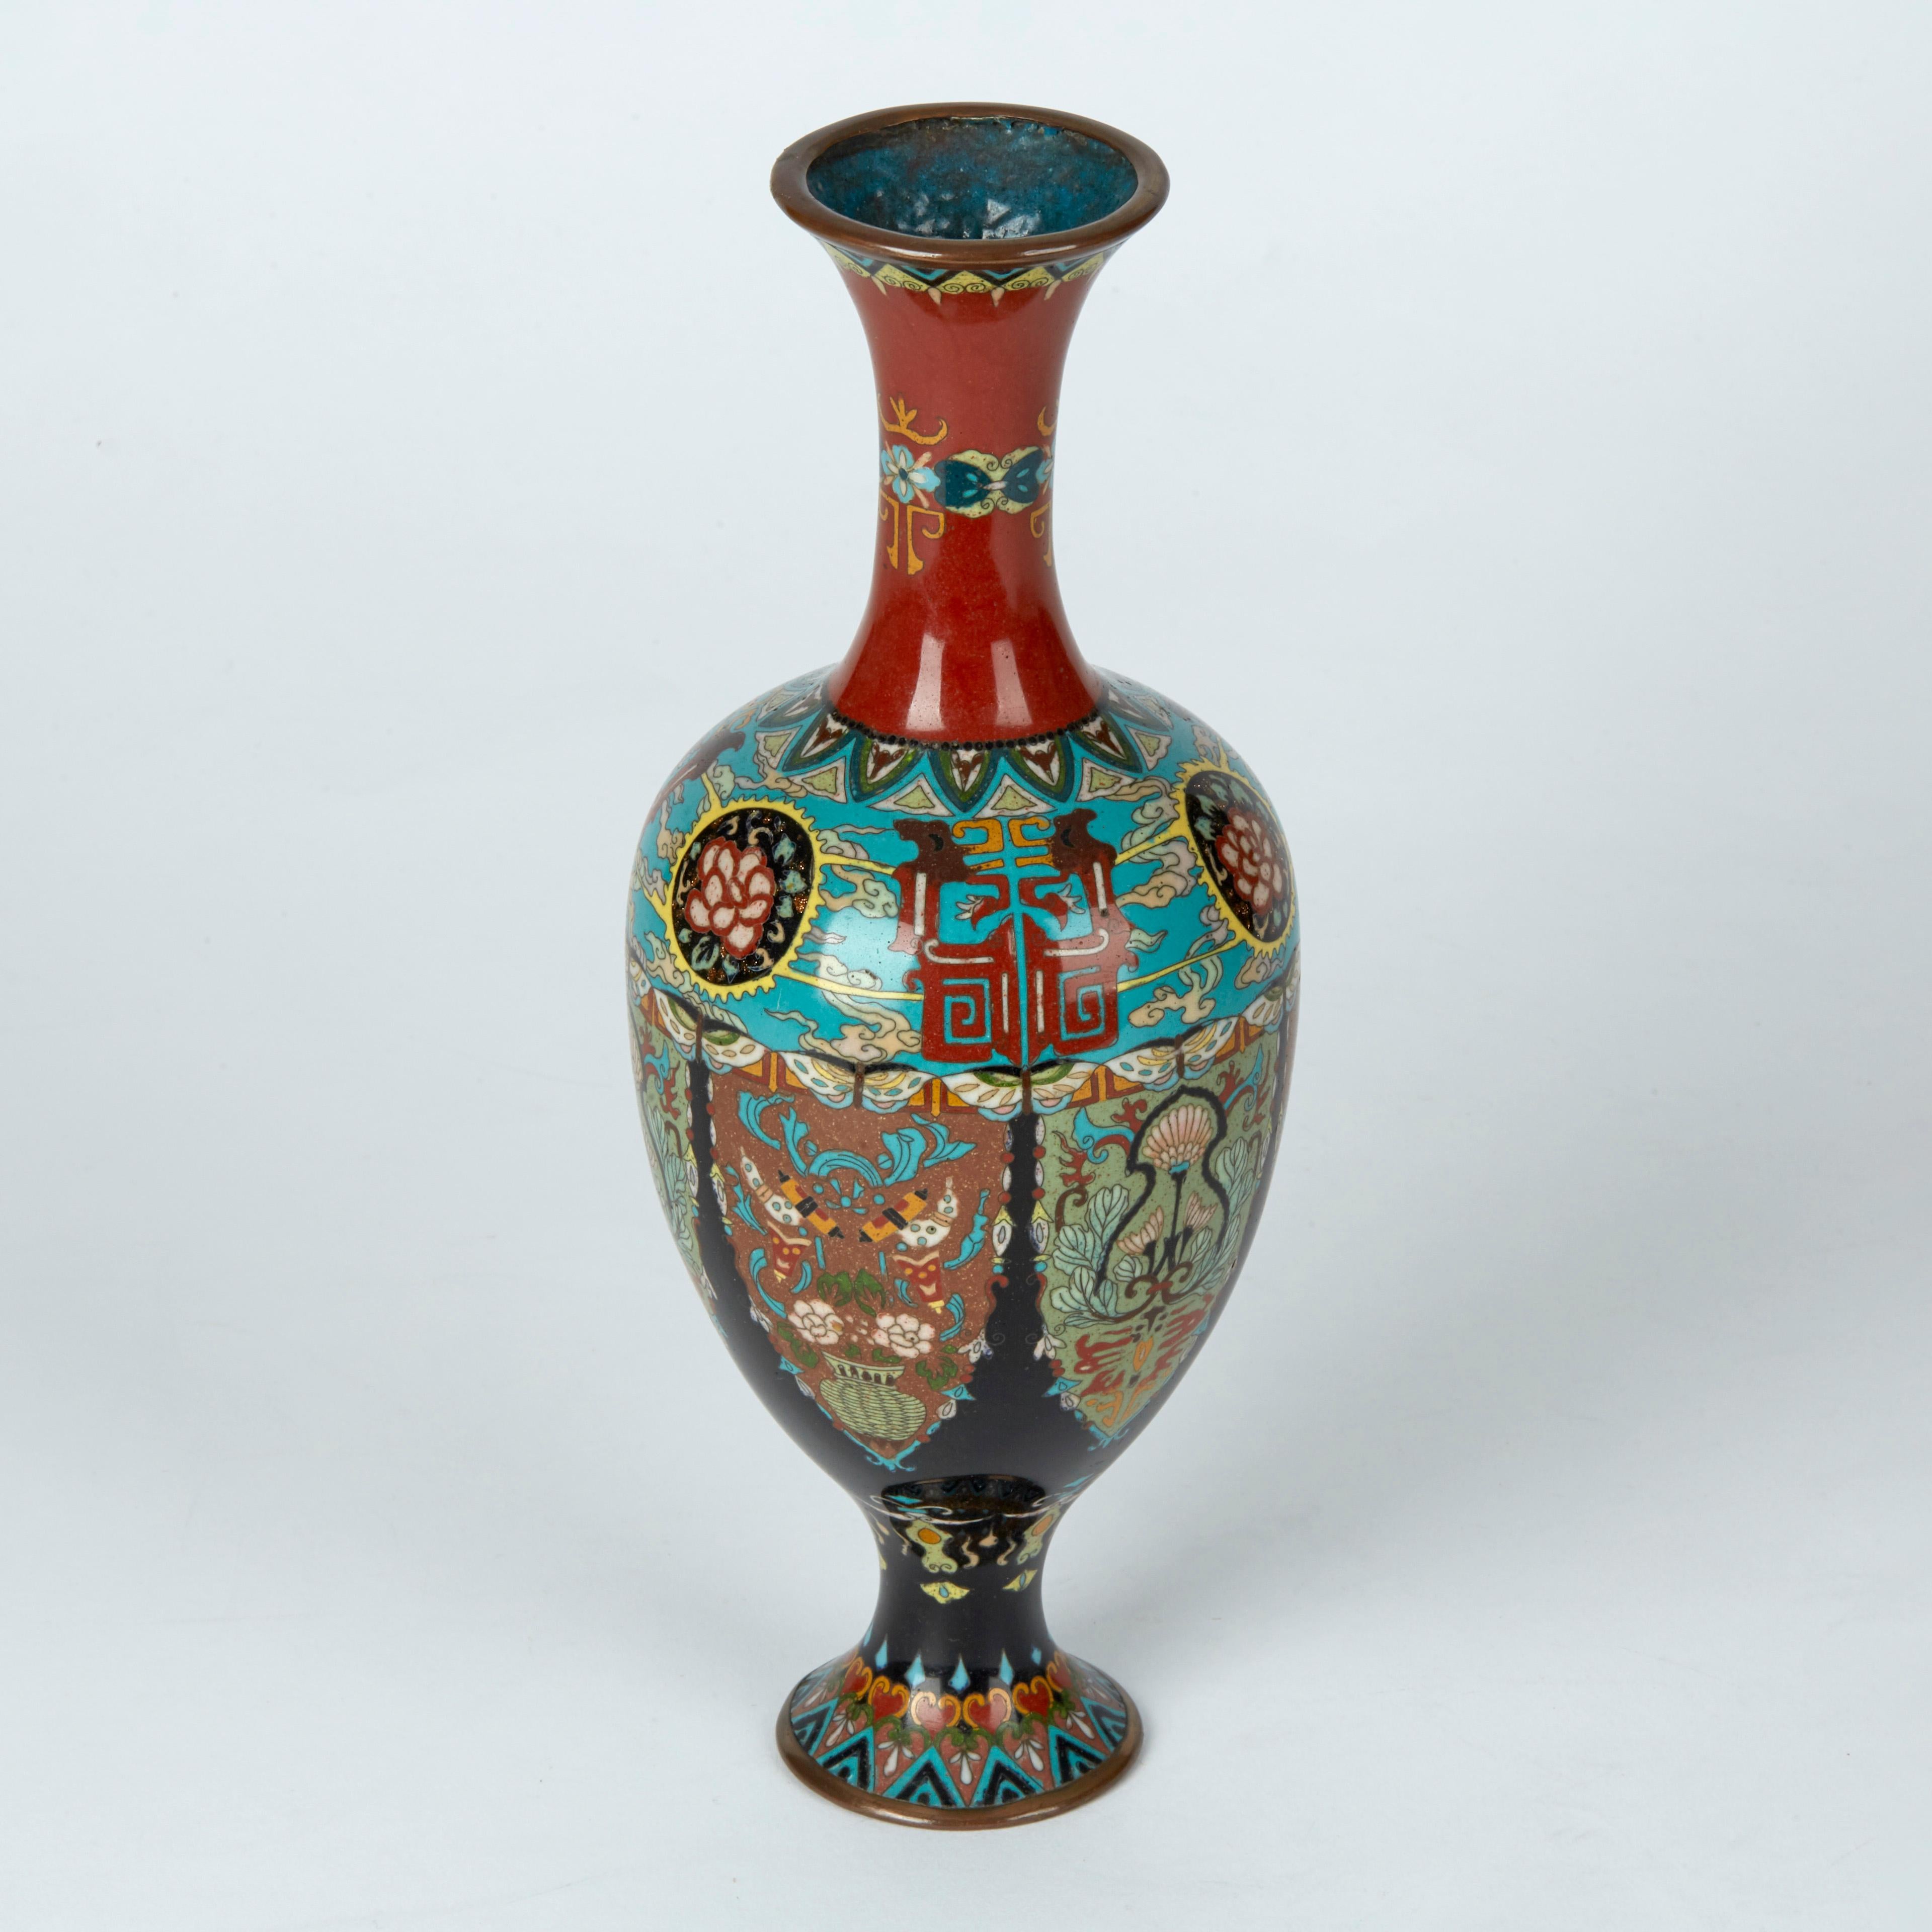 A stunning and elaborately decorated antique Japanese cloisonné vase of elegant shape standing on a narrow rounded pedestal foot with an egg shaped body and tall slender trumpet neck. The vase is decorated with in colored enamels on a blue and red